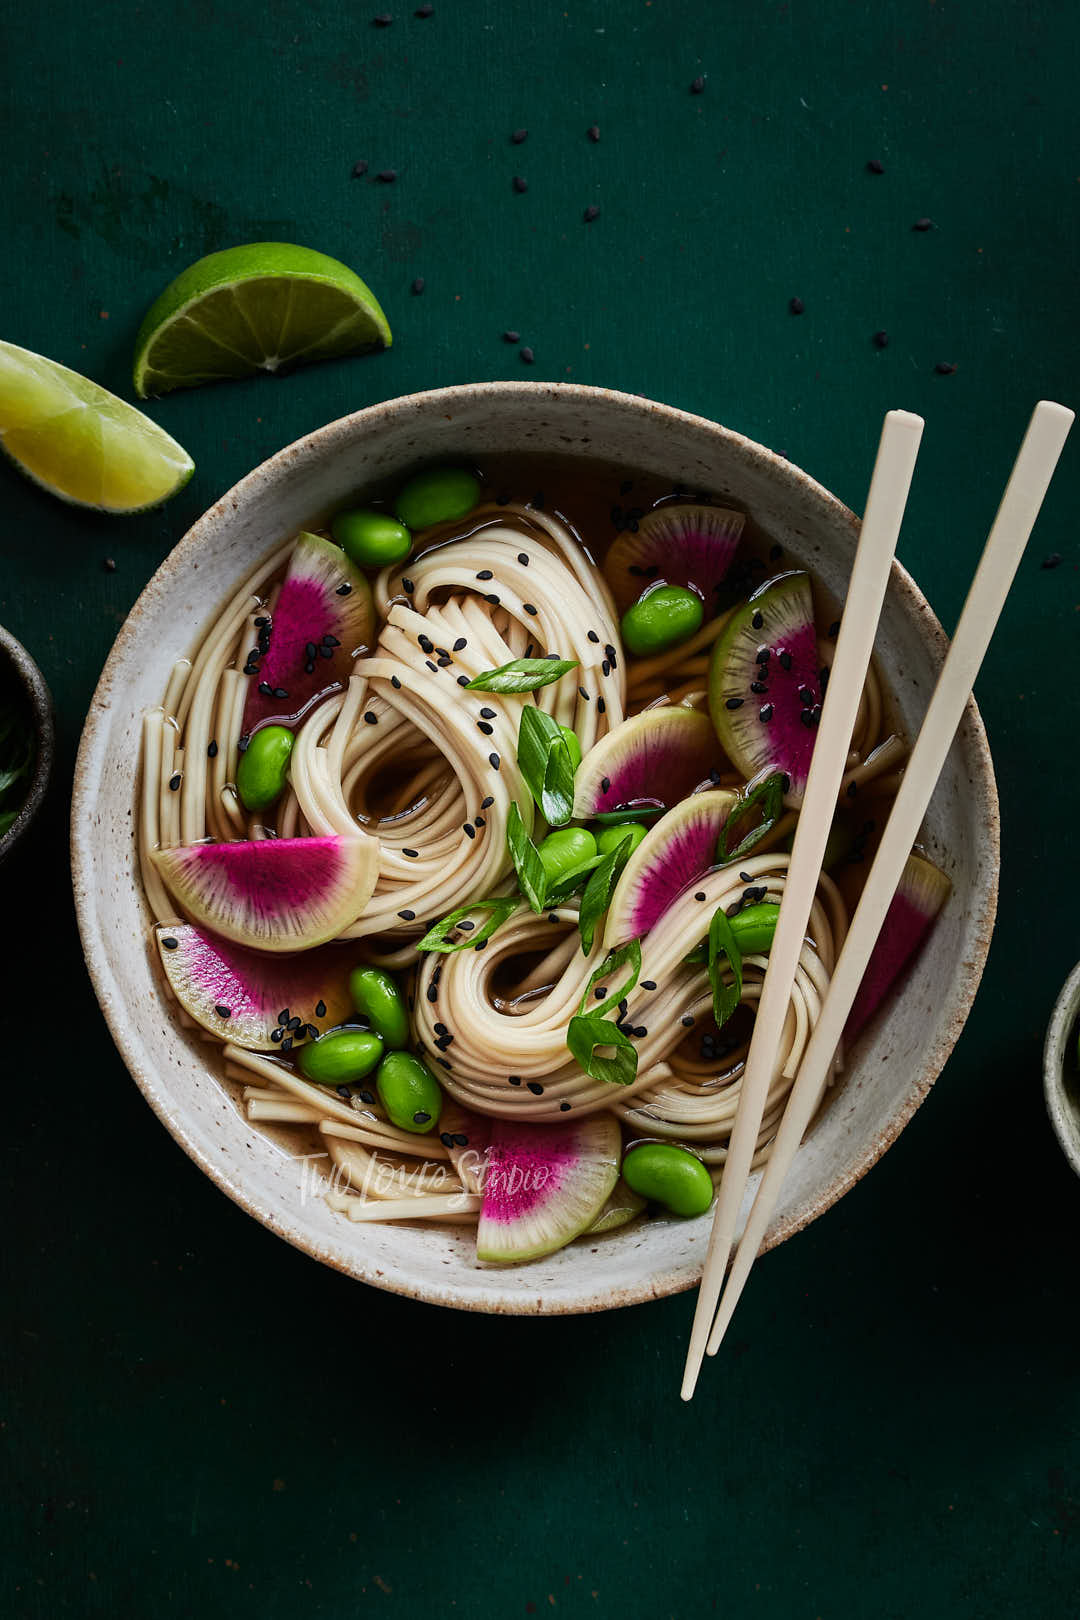 Dark green background with a large noodle soup bowl, ramen noodle nests with slices of radishes. 